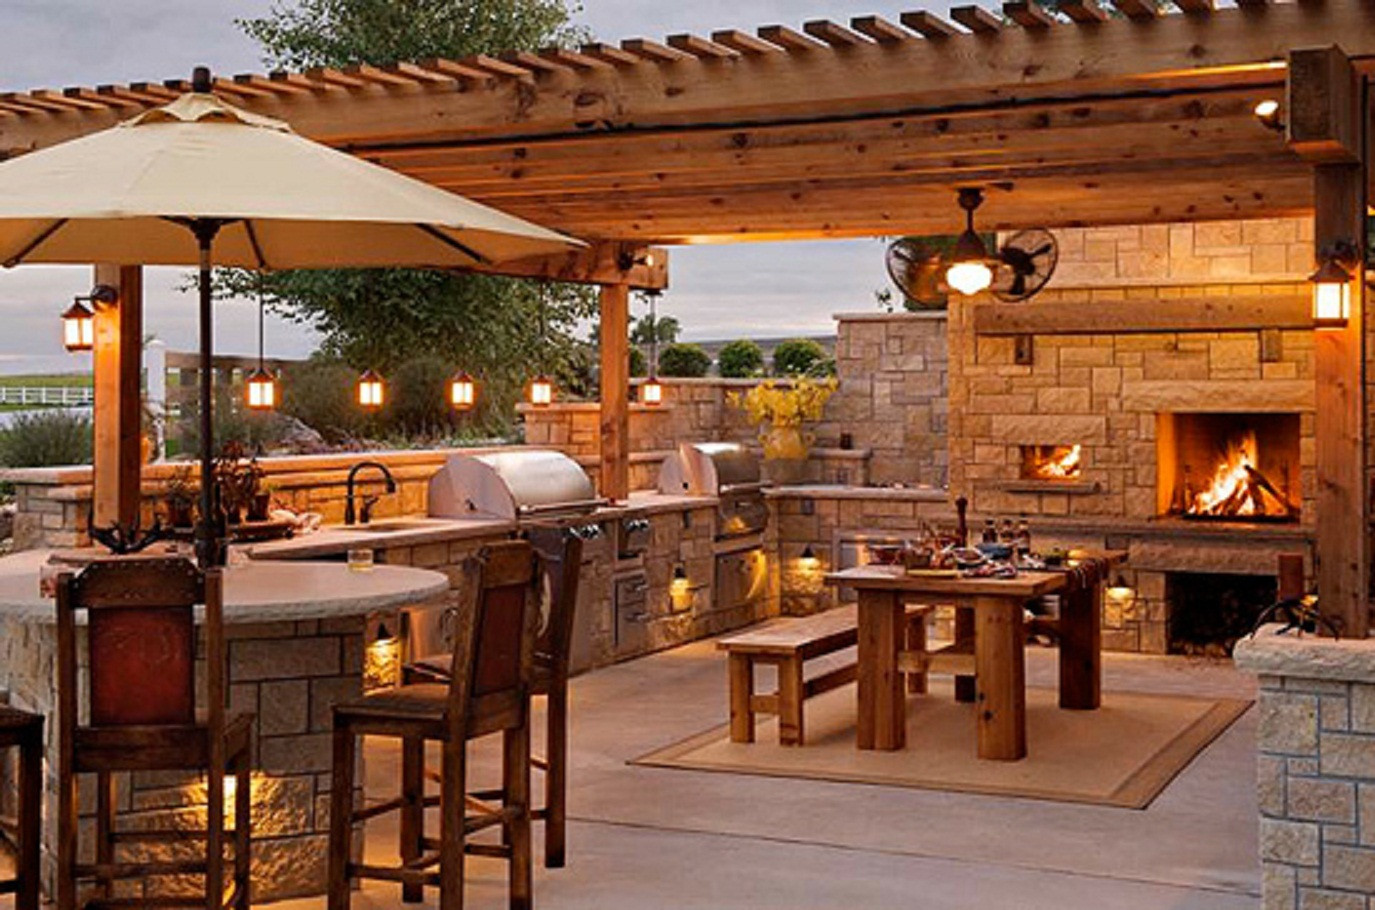 Outdoor Kitchen Images
 How to Design Your Perfect Outdoor kitchen Outdoor